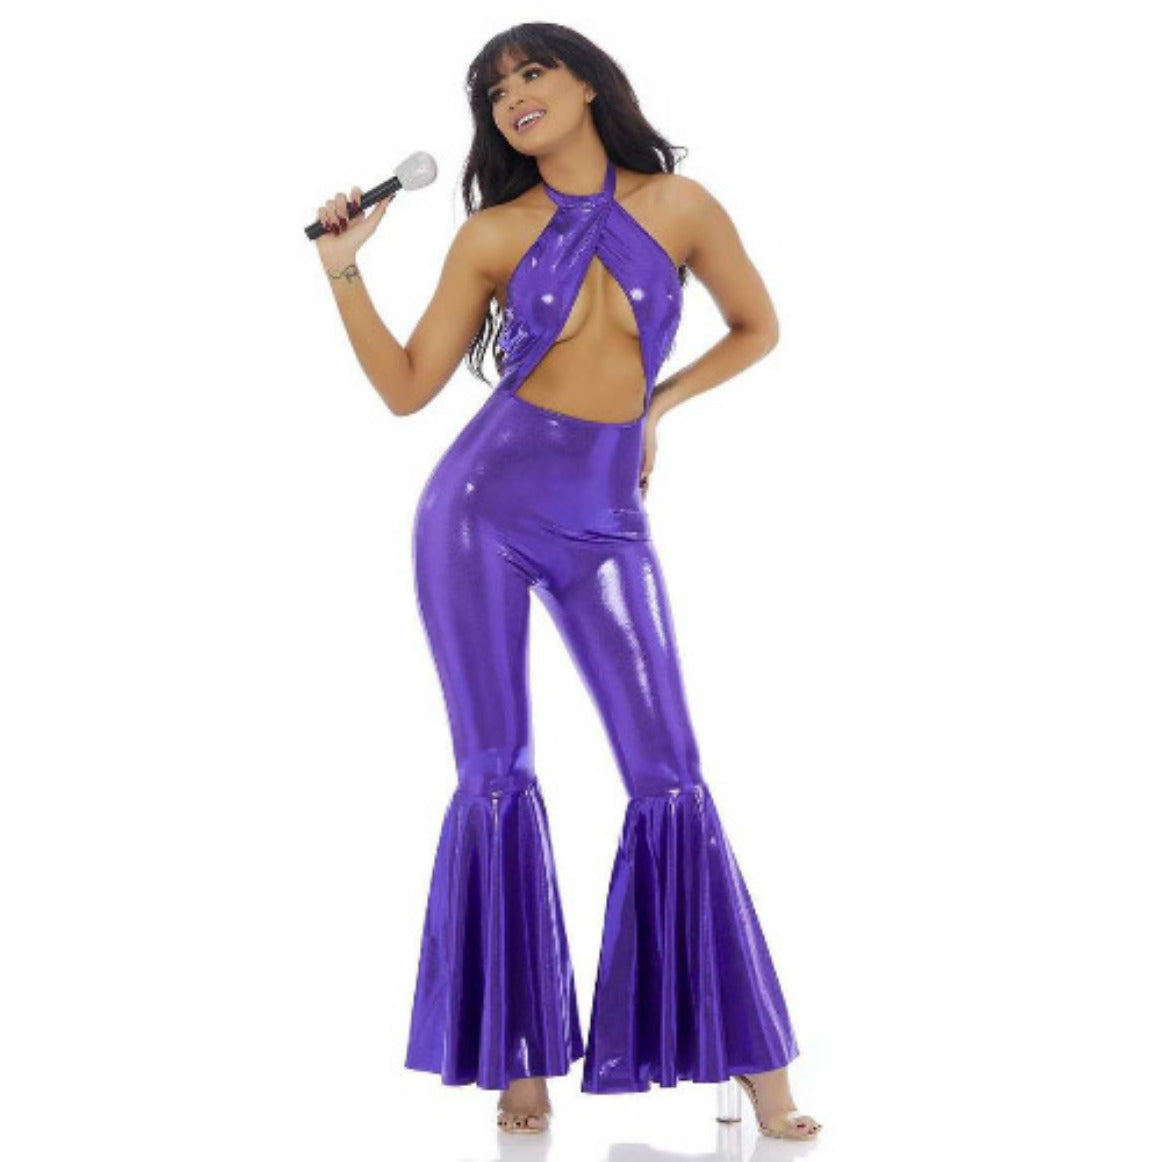 La Flor Queen of Tejano Music Sexy Adult Costume